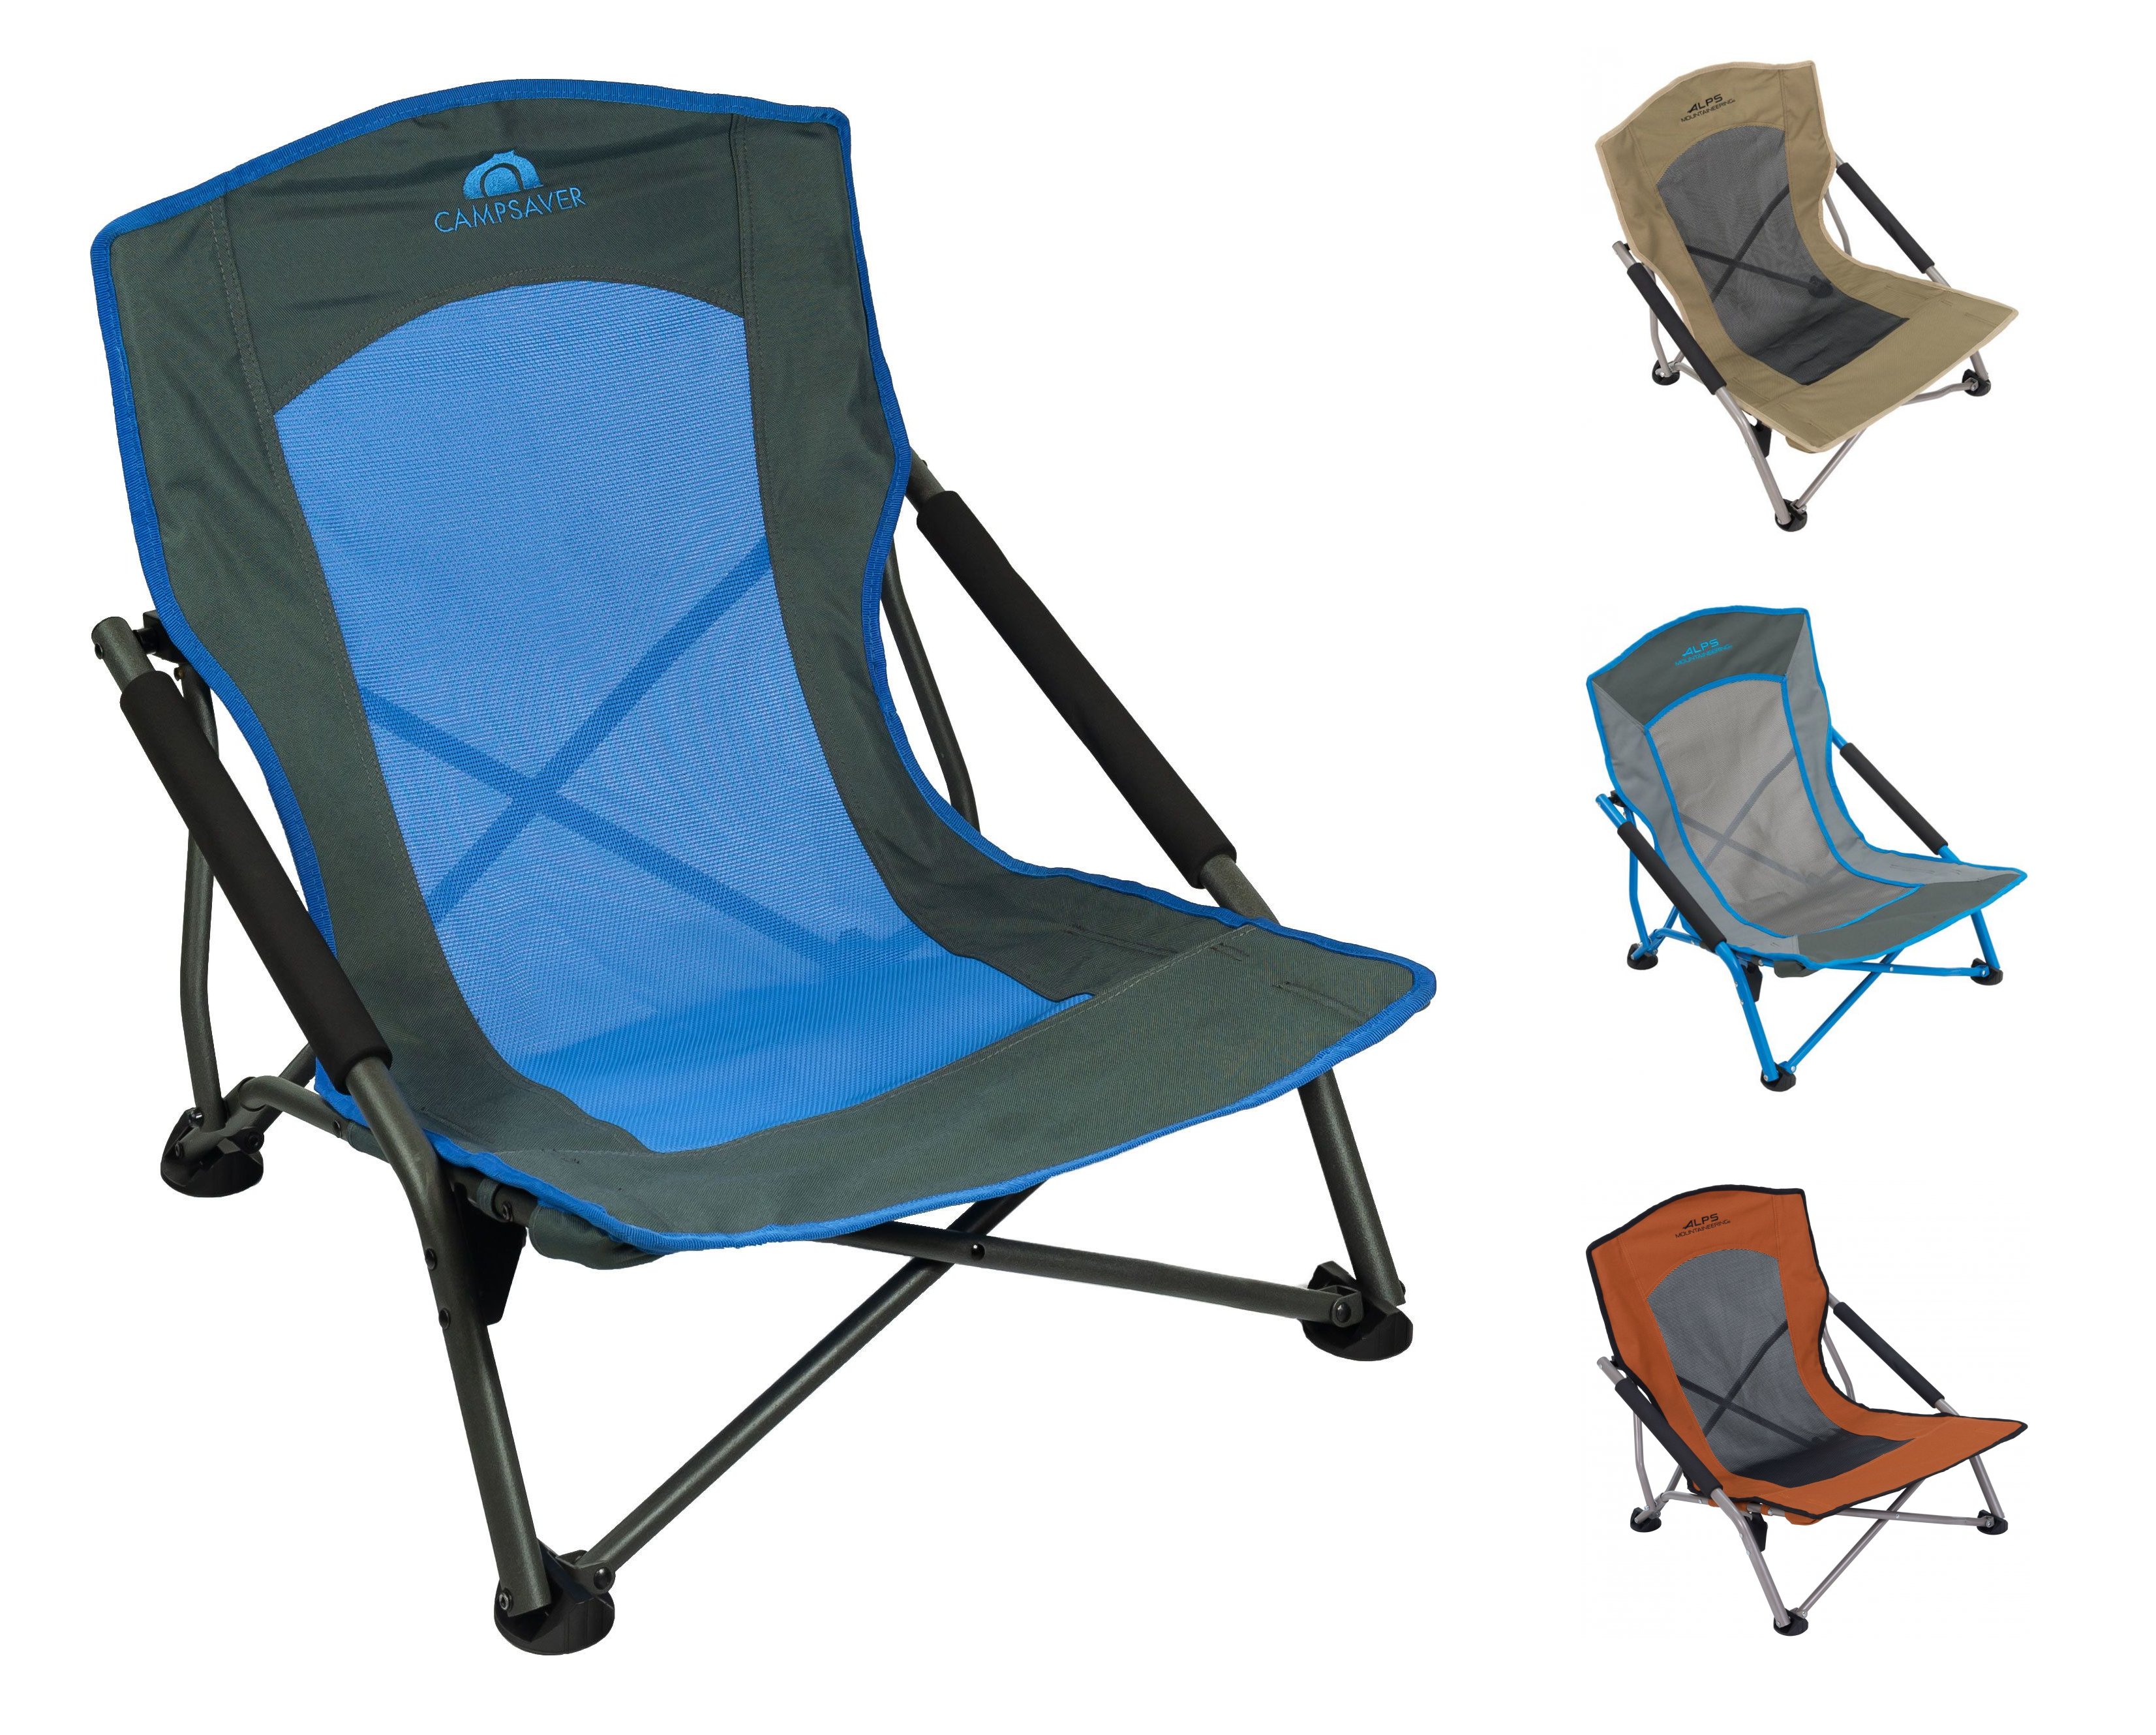 ALPS Mountaineering Rendezvous Chair | 4.6 Star Rating w/ Free S&H